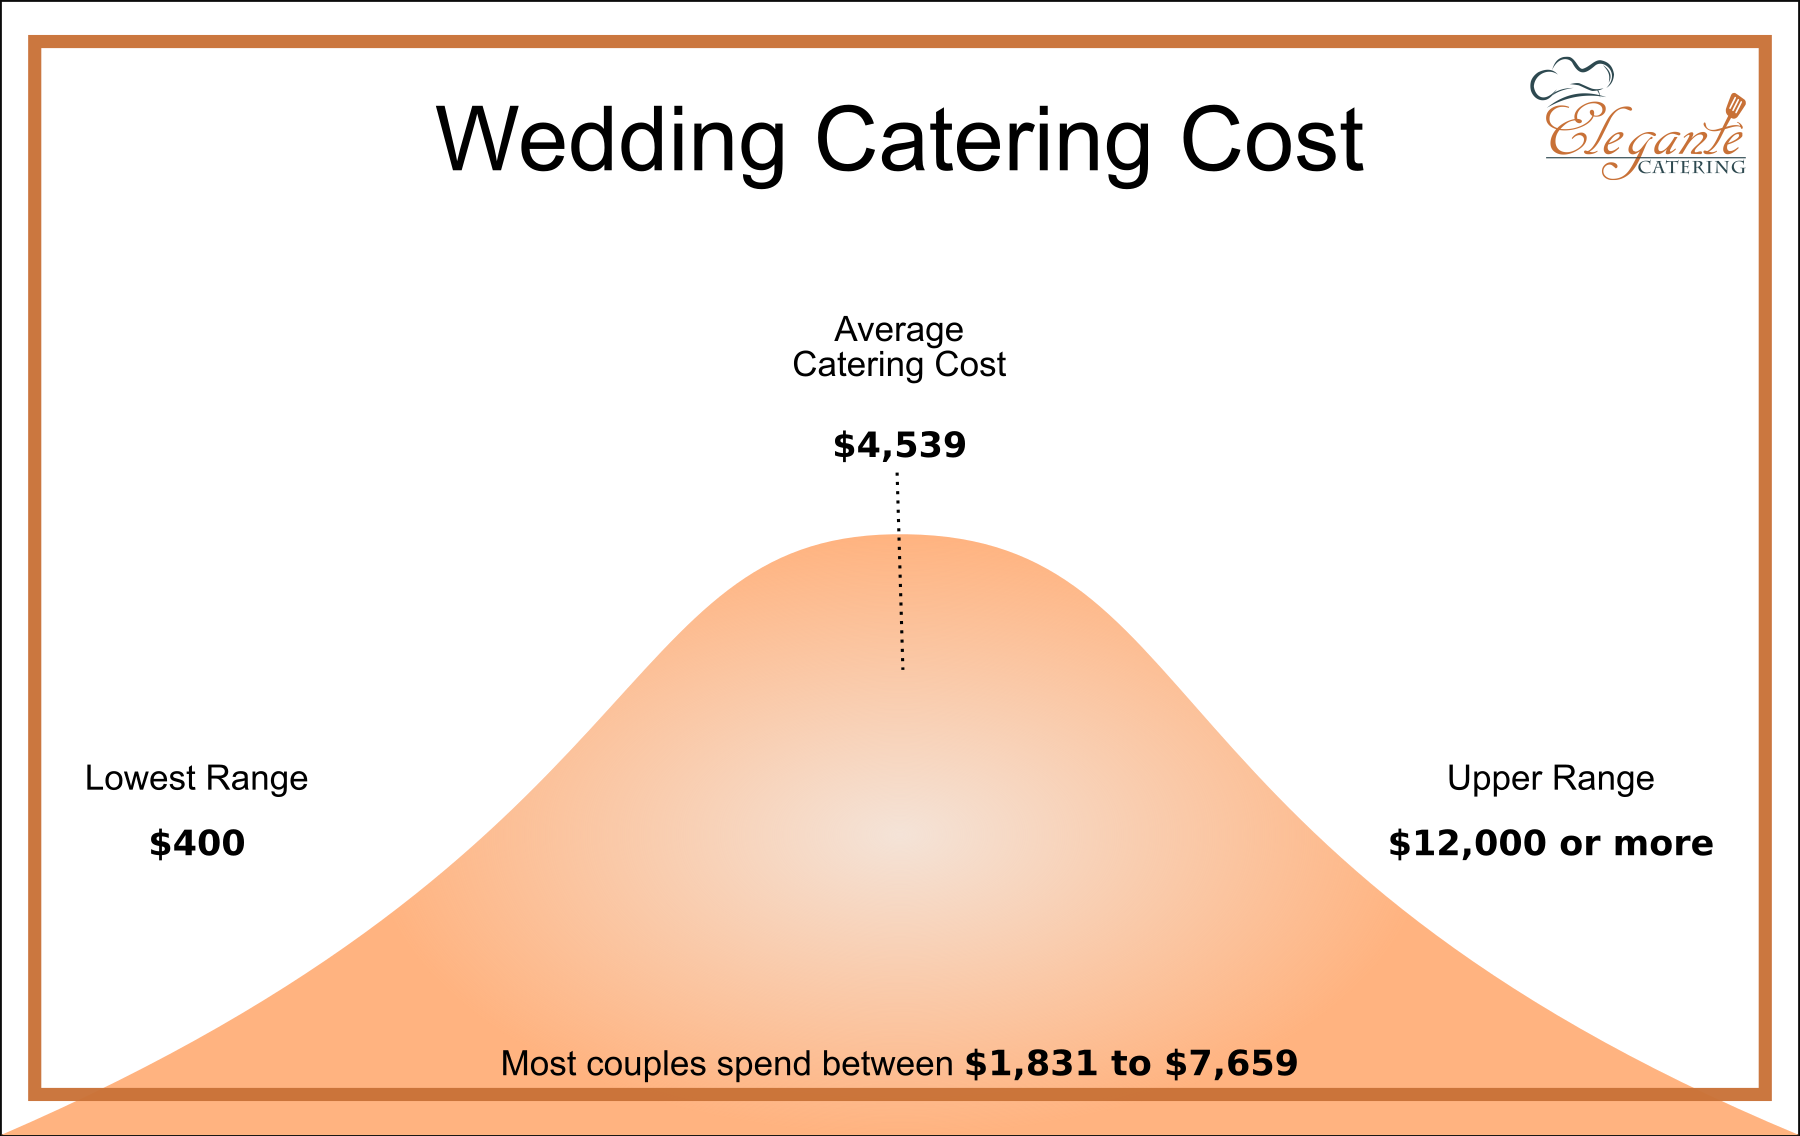 How Much Does a Wedding Catering Cost Chart